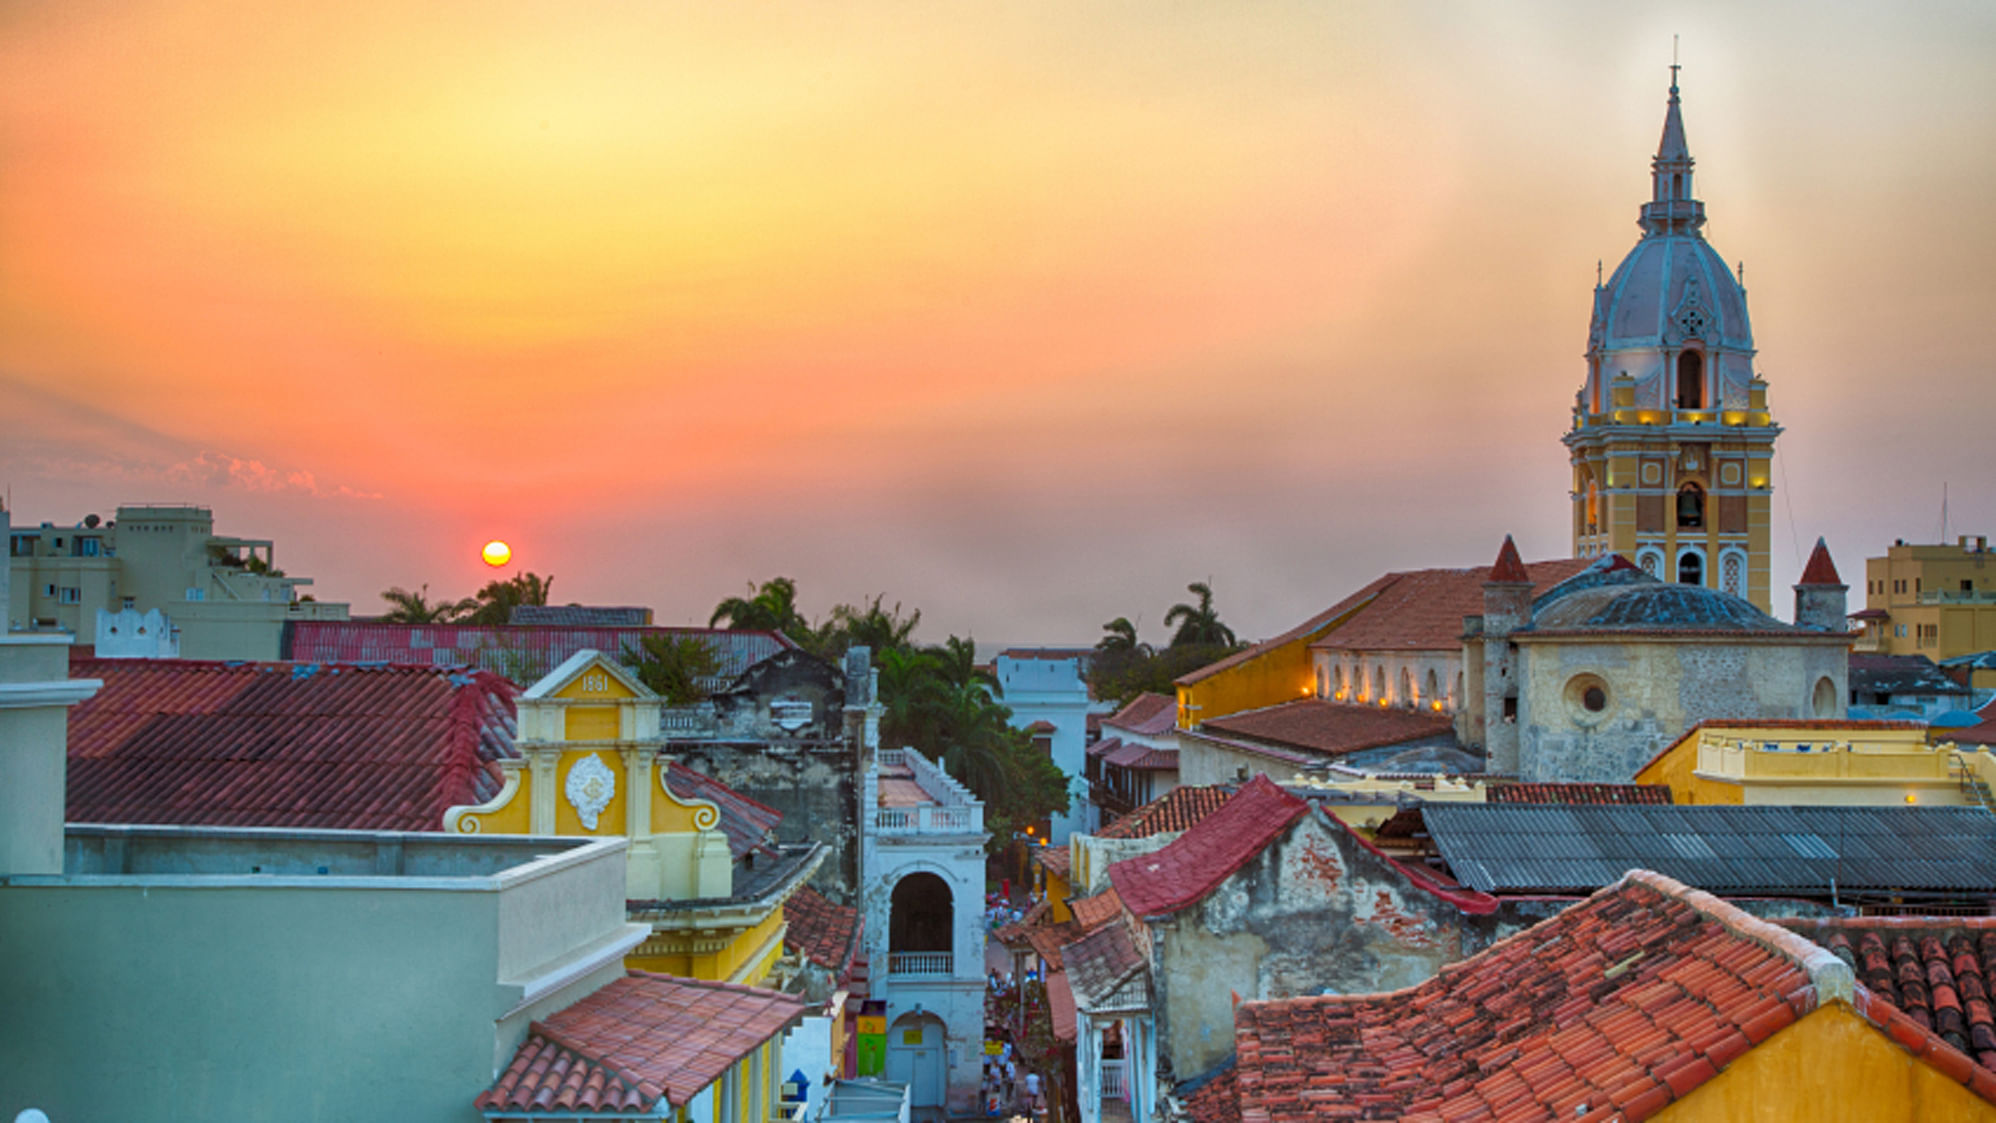 A picture of Cartagena, Colombia – where much of Marquez’s works were set. (Photo: iStock)